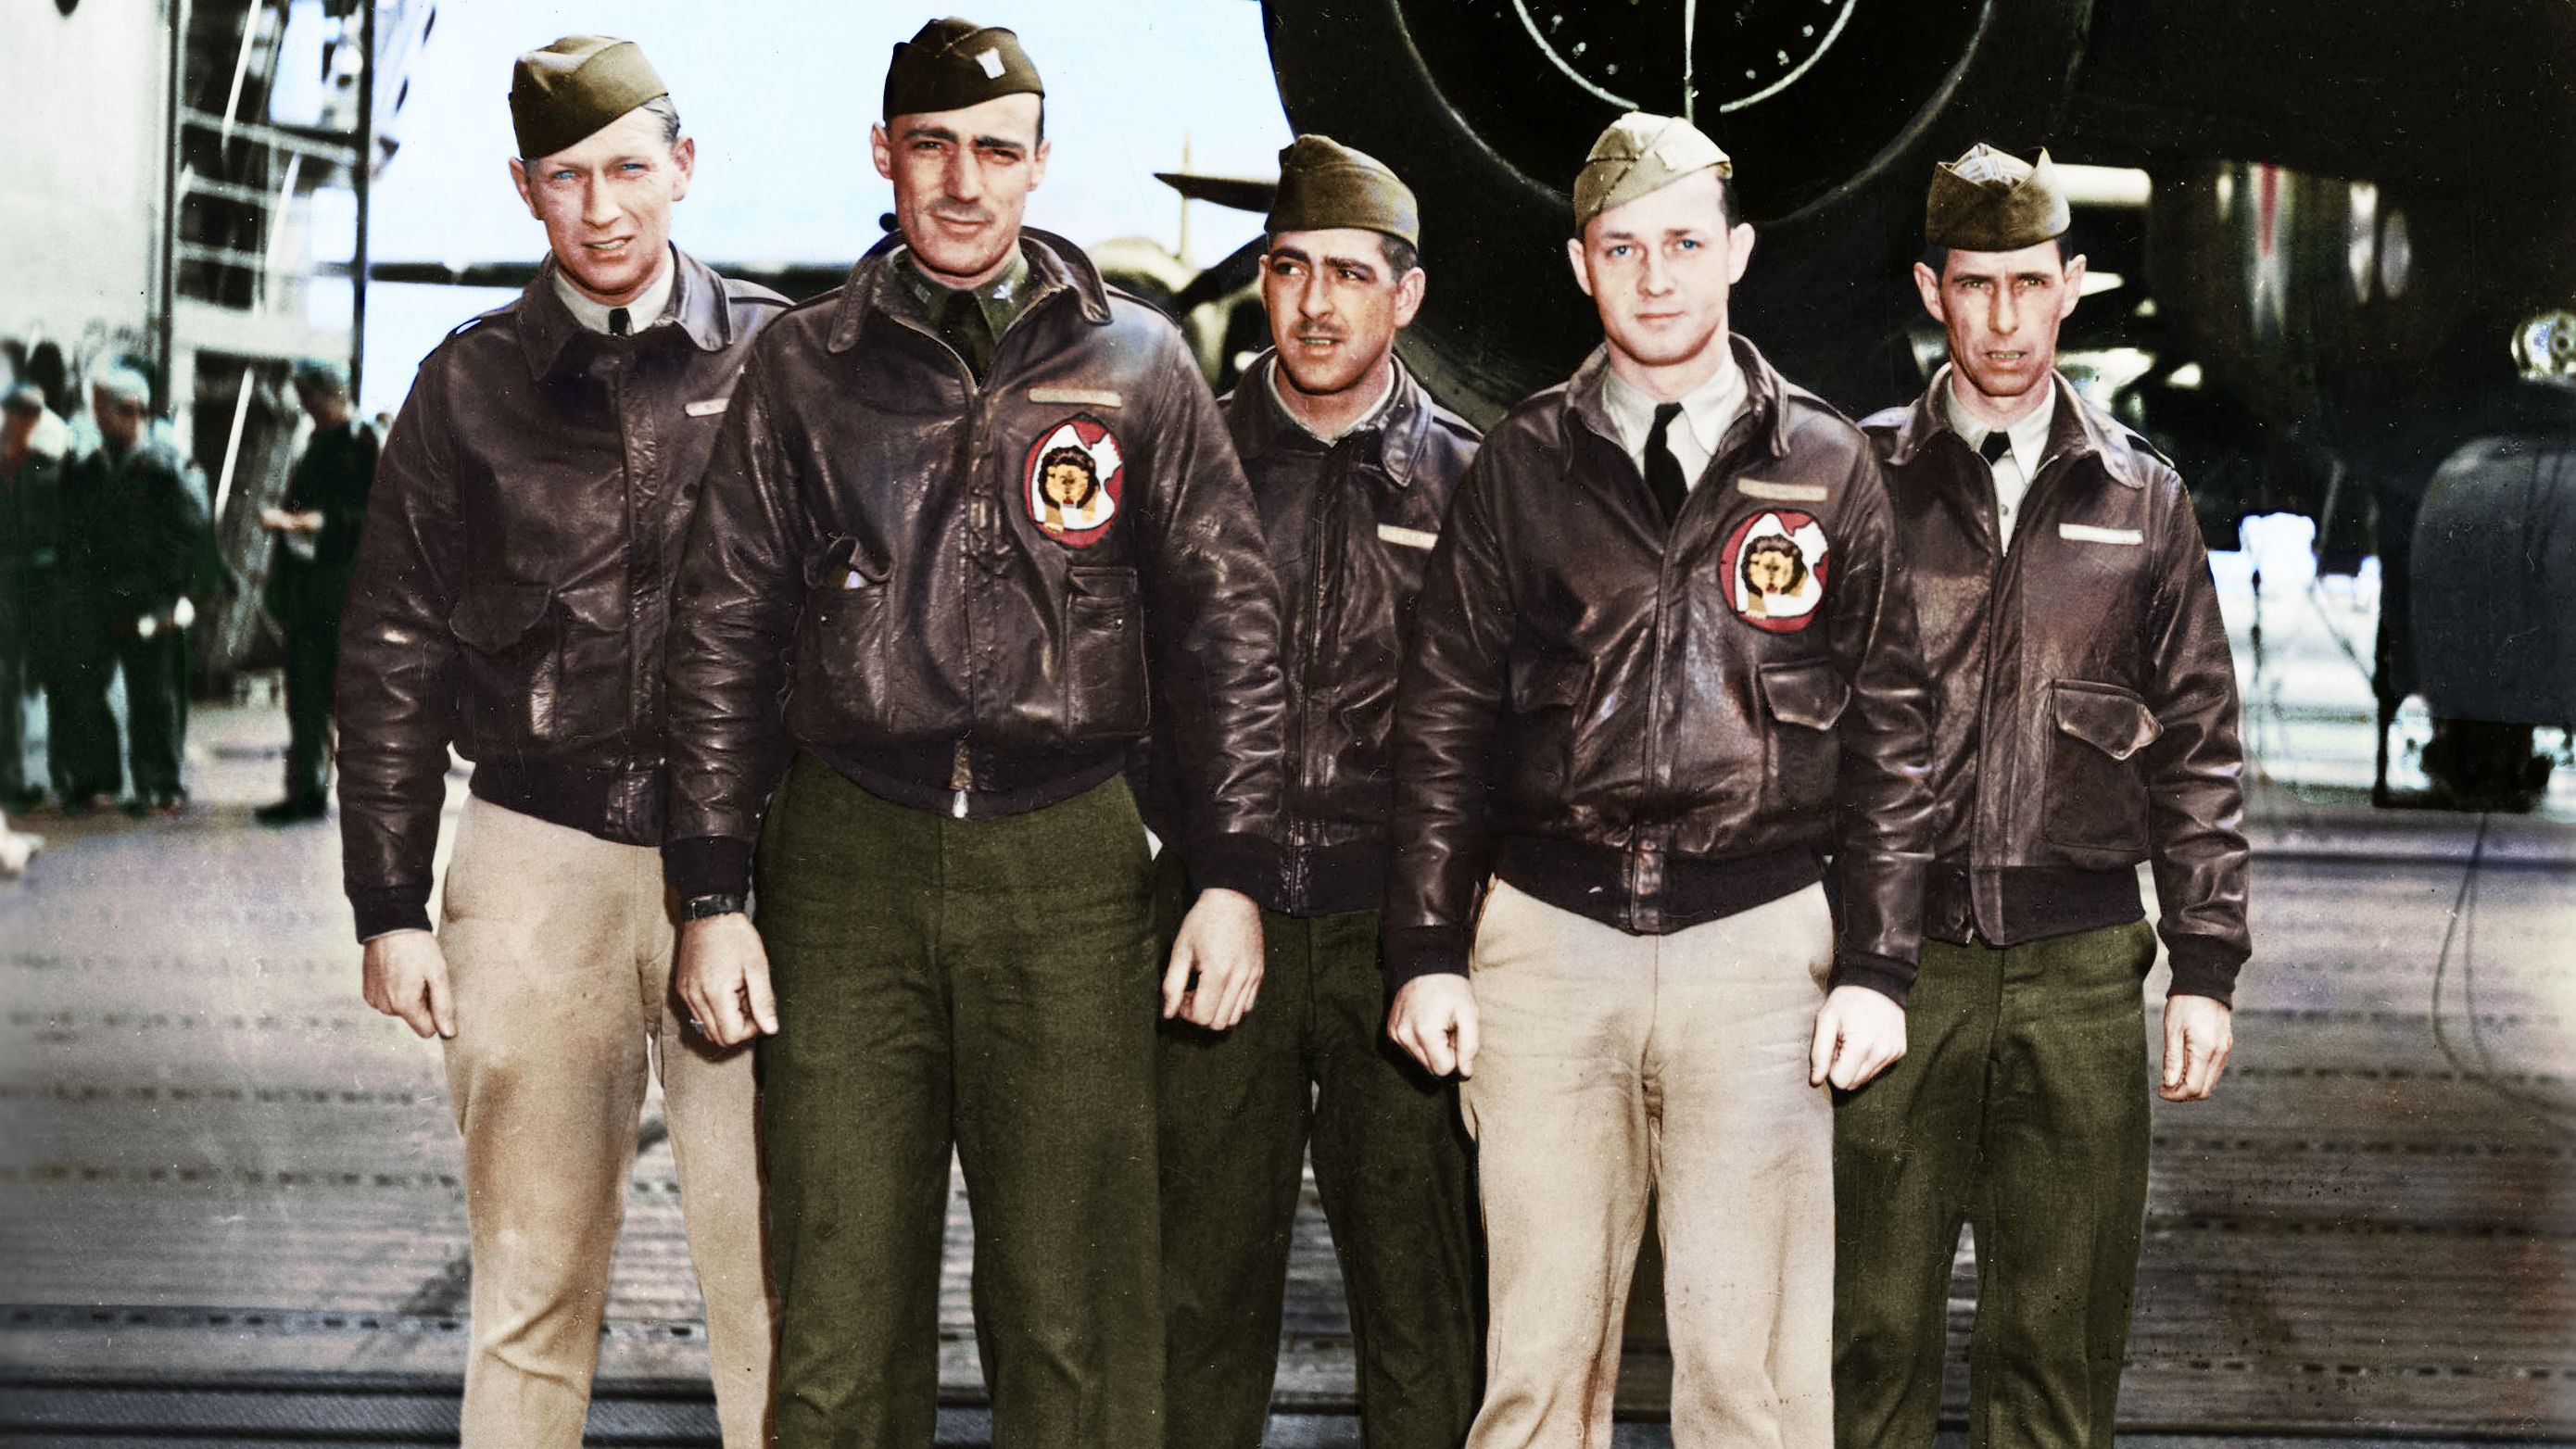 The 16 air crews commanded by aviation legend James “Jimmy” Doolittle became national heroes in 1942, thanks to their raid on military targets in Tokyo and beyond. Pictured is the crew of plane #12, commanded by pilot 1st Lt. Bill Bower (second from left). (photo credit: Lori B. Lang)